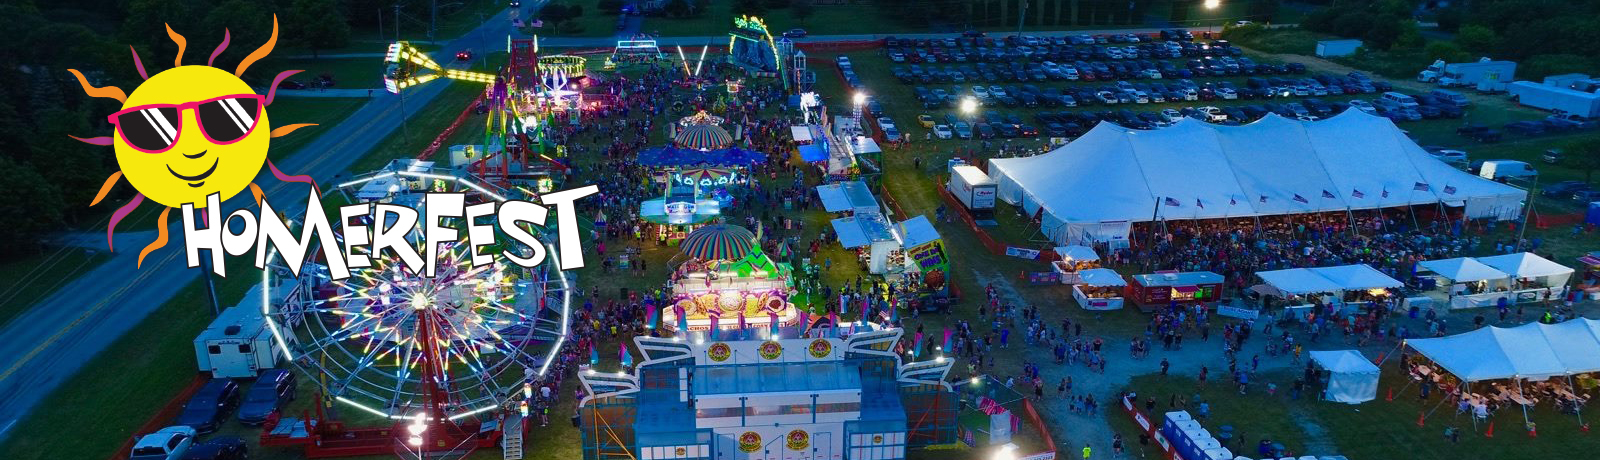 Drone photo of Homerfest at night with event logo in corner